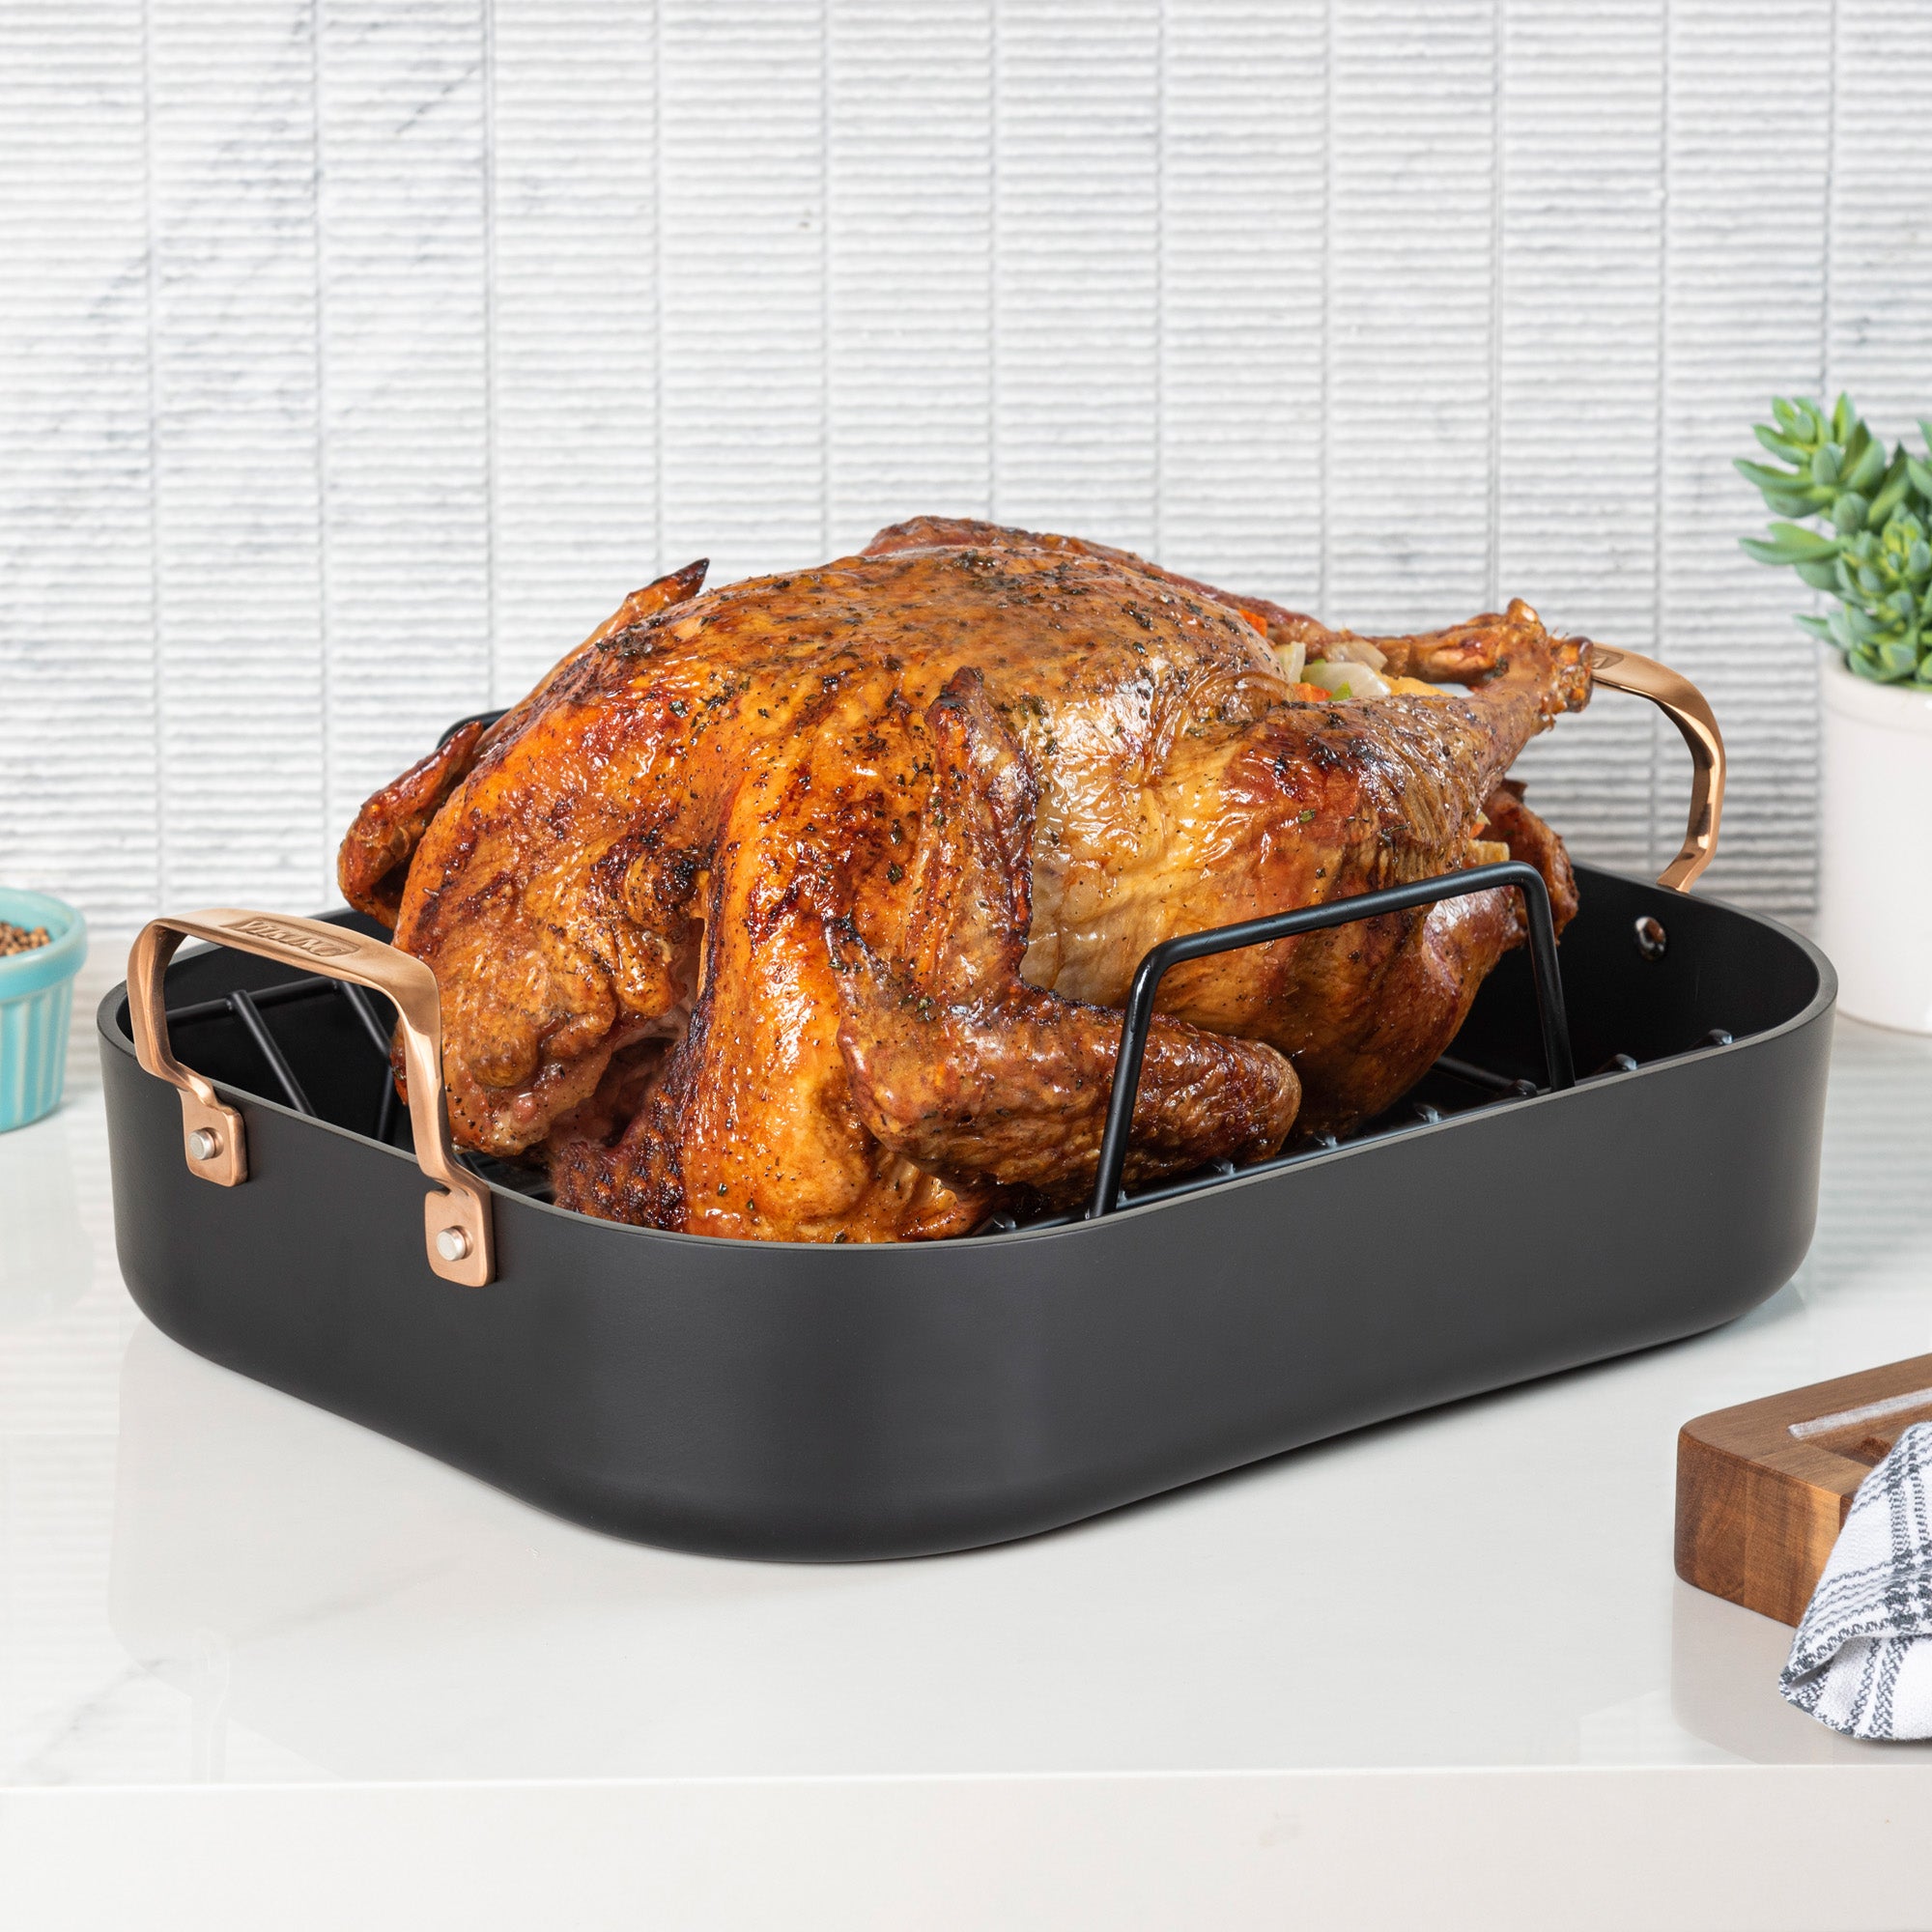 Le Creuset Stainless-Steel Roasting Pan with Nonstick Rack